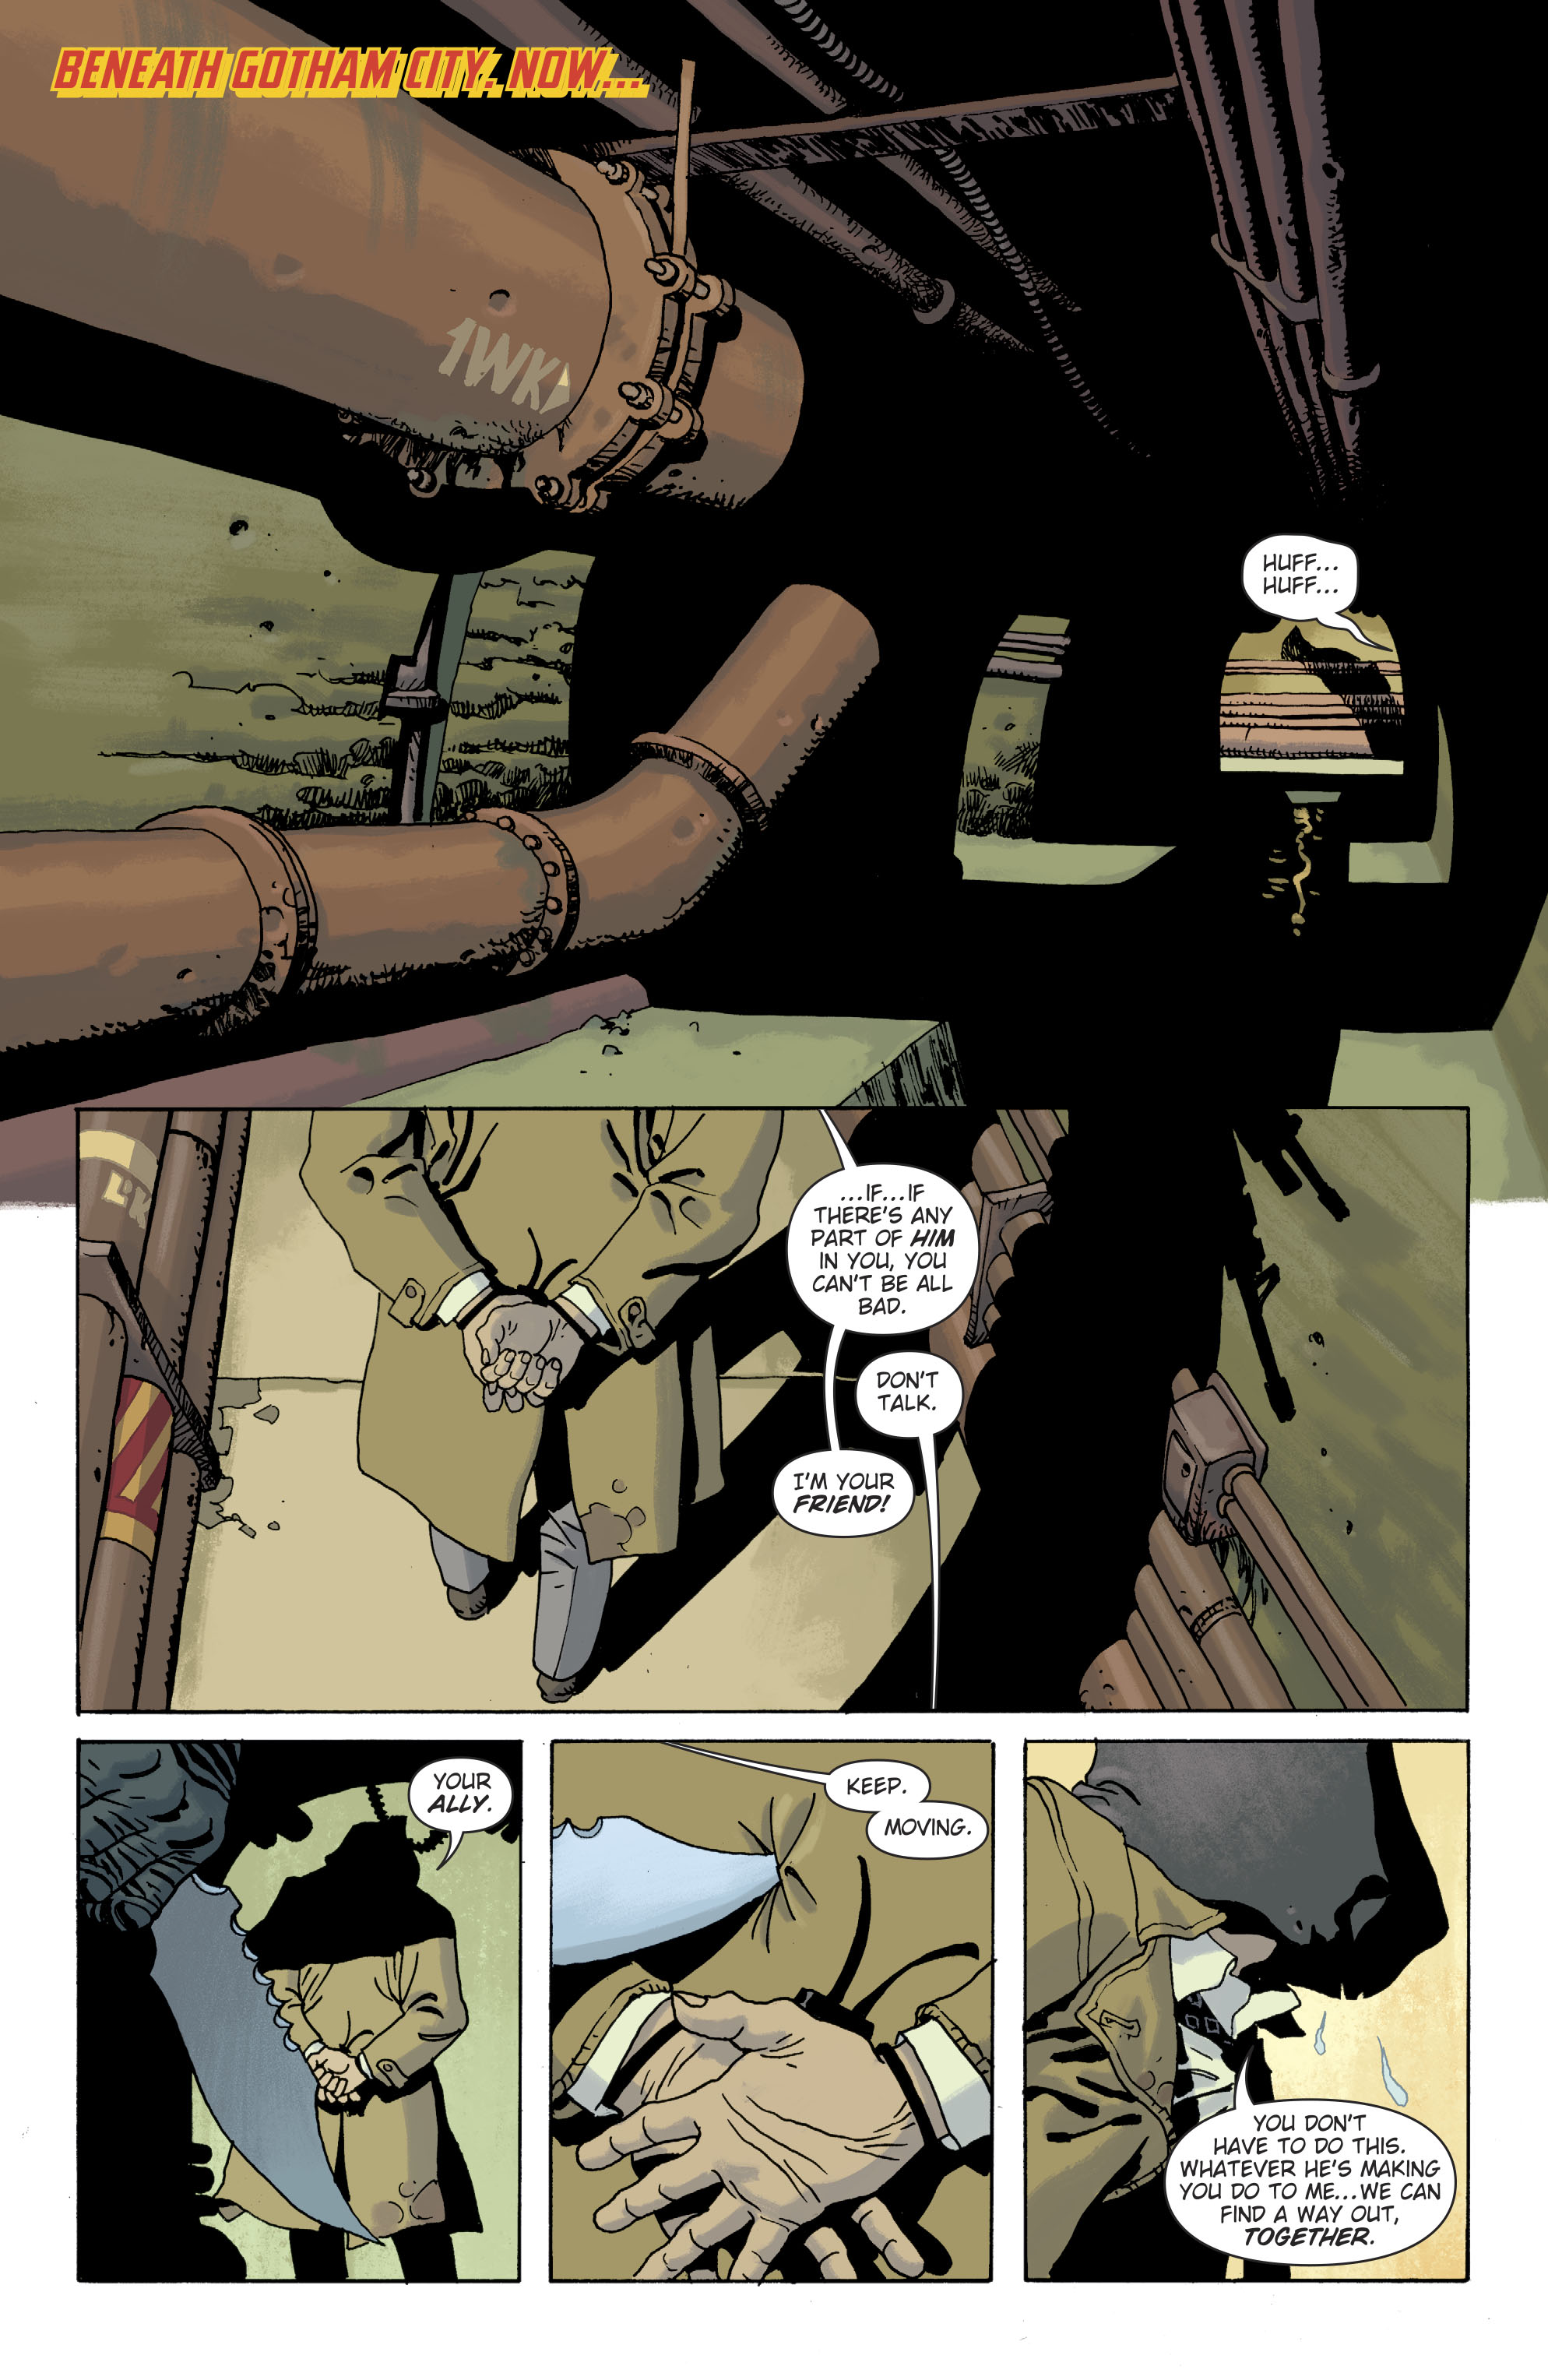 The Batman Who Laughs: The Grim Knight (2019): Chapter 1 - Page 4